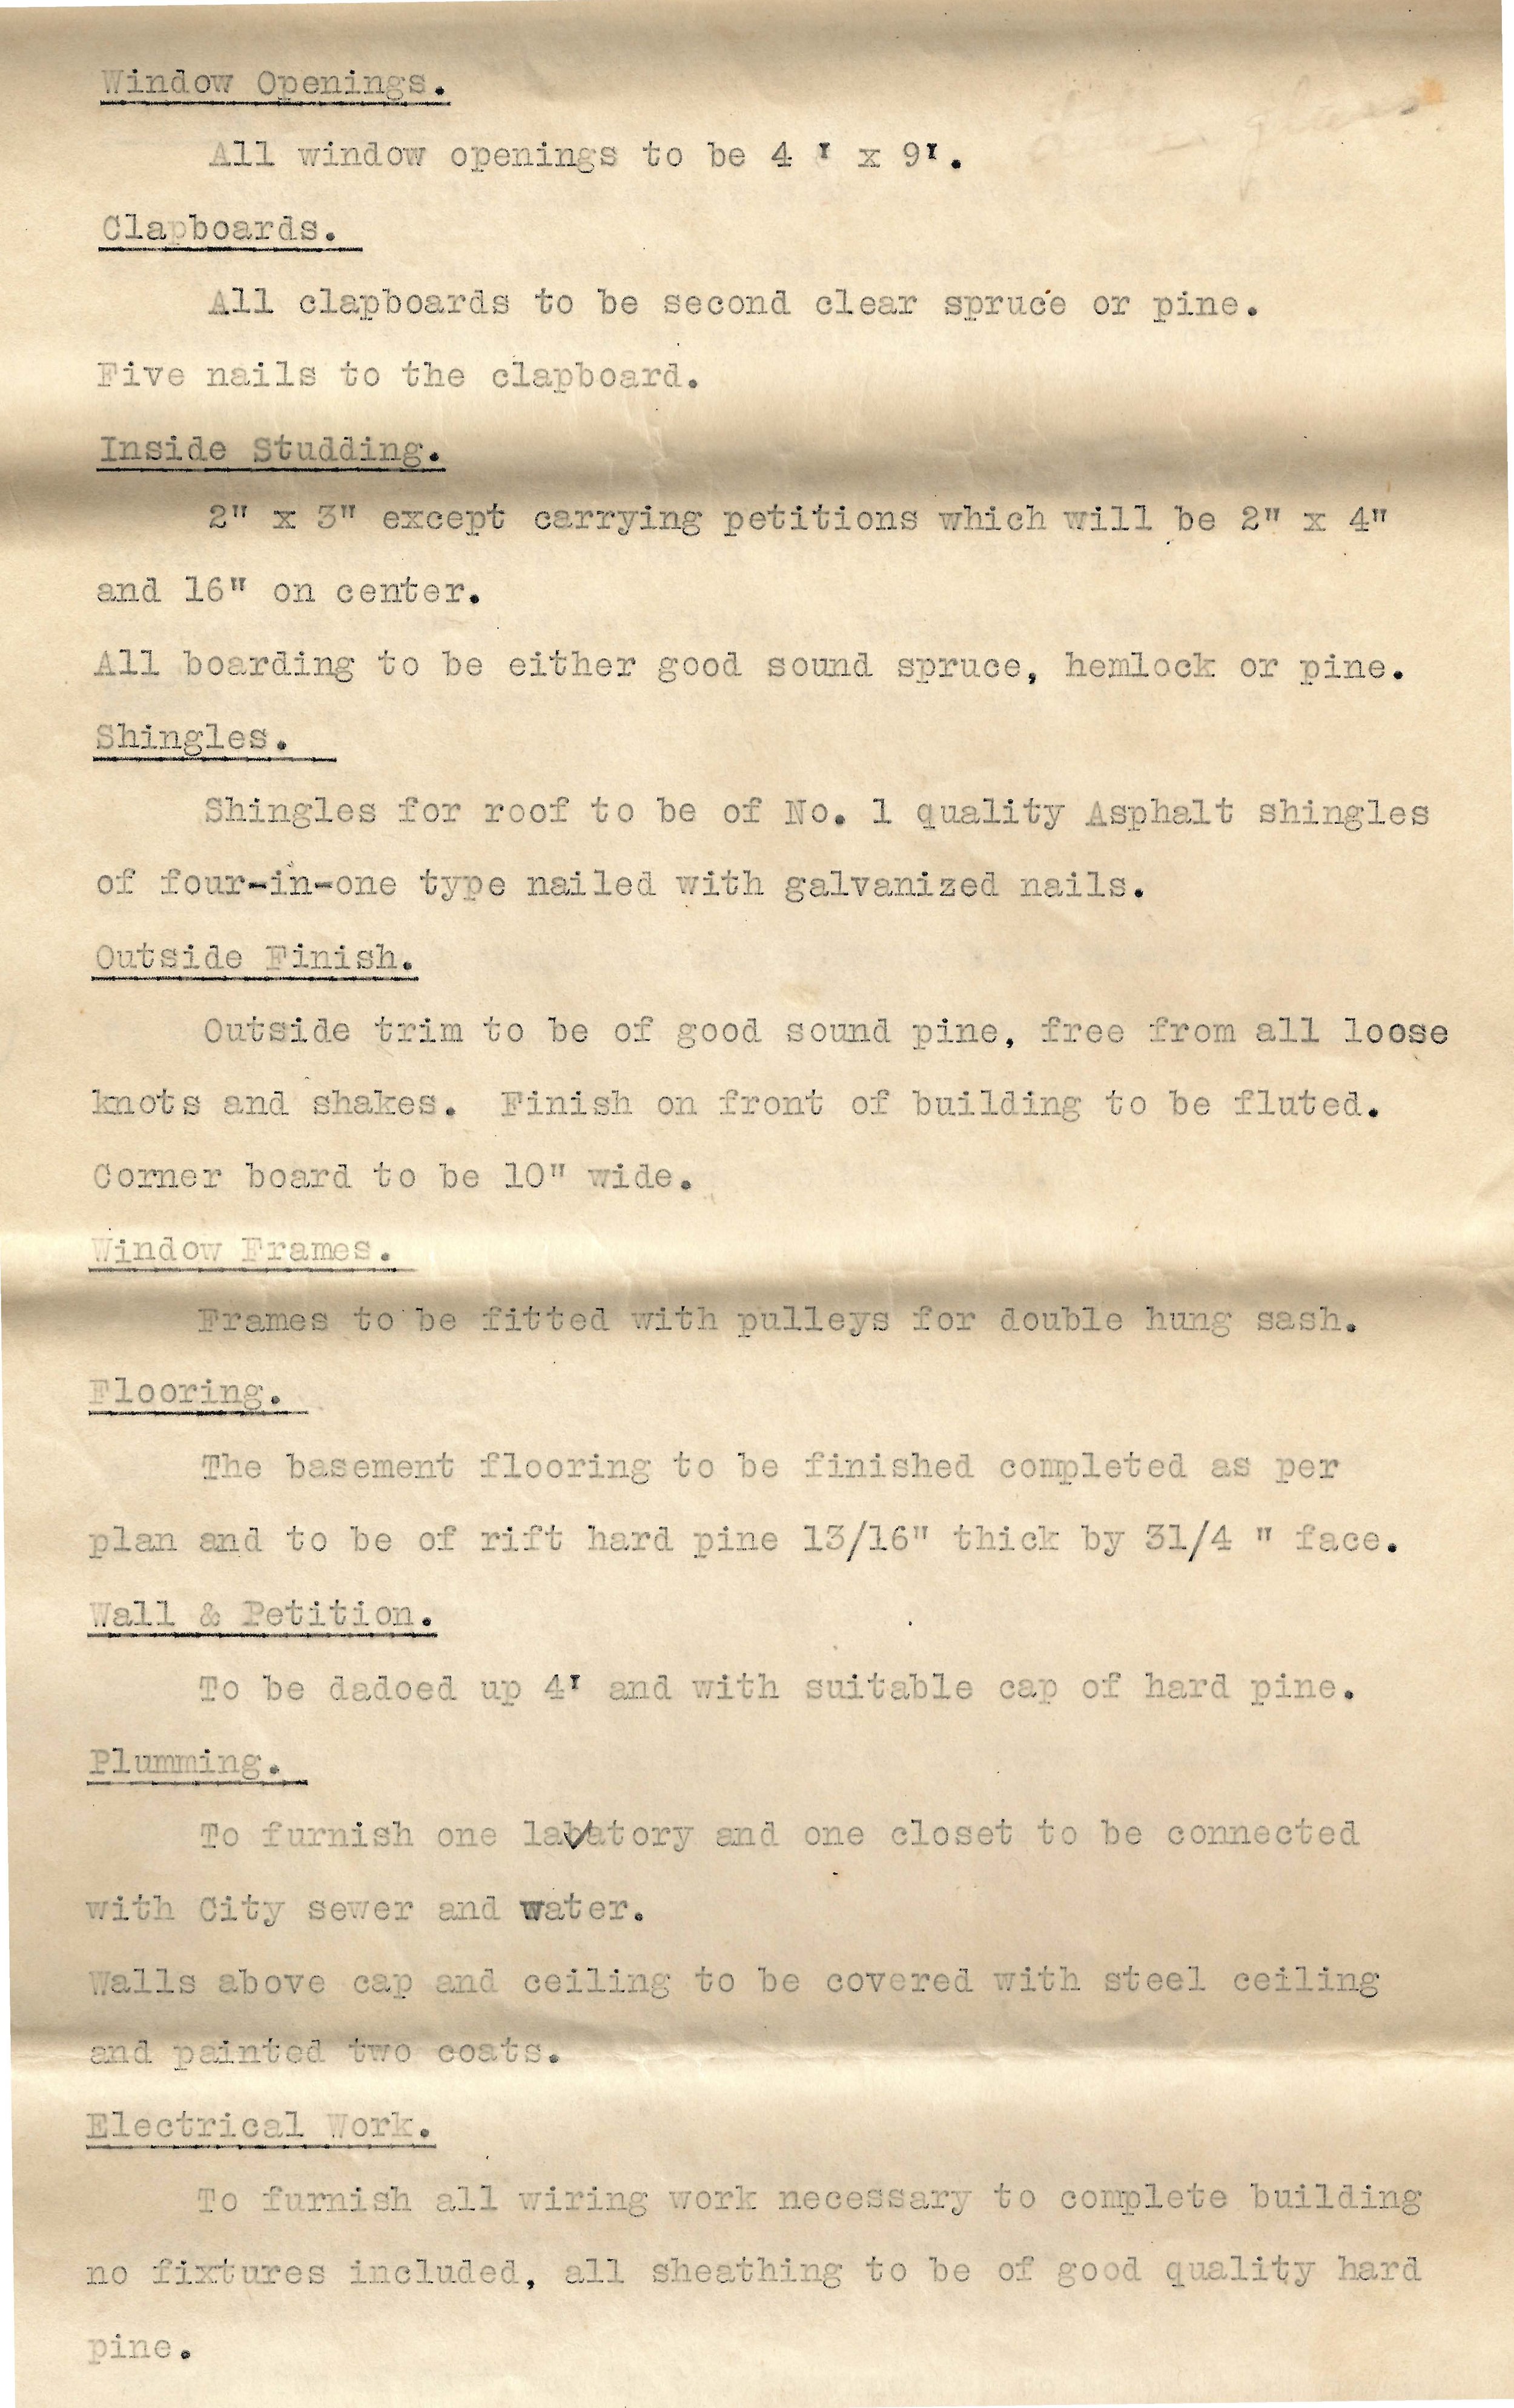 Contractor Agreement (1921)_Page_09.jpg